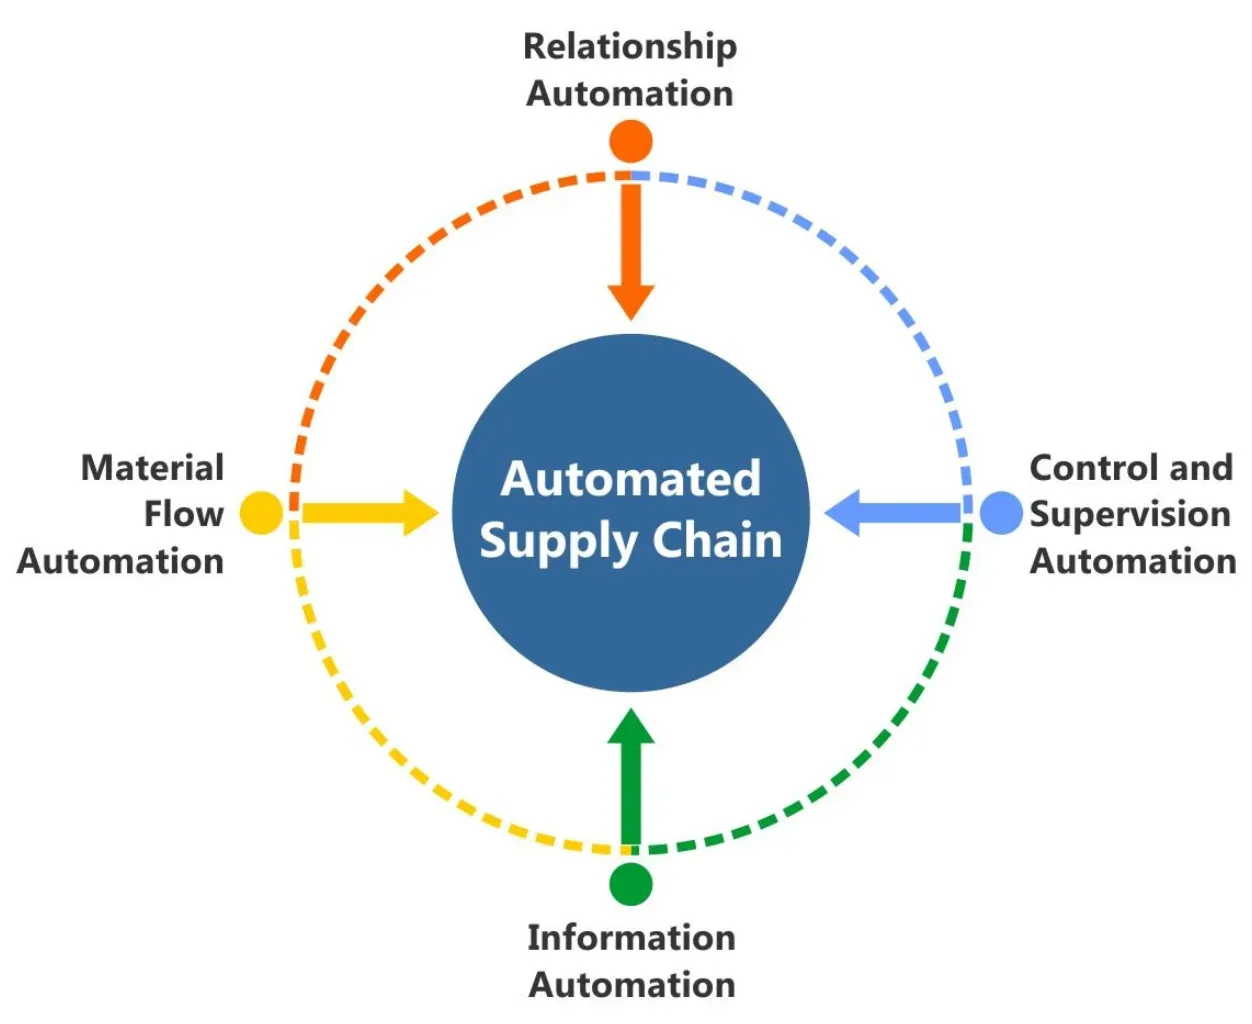 Why is Supply Chain Automation important?